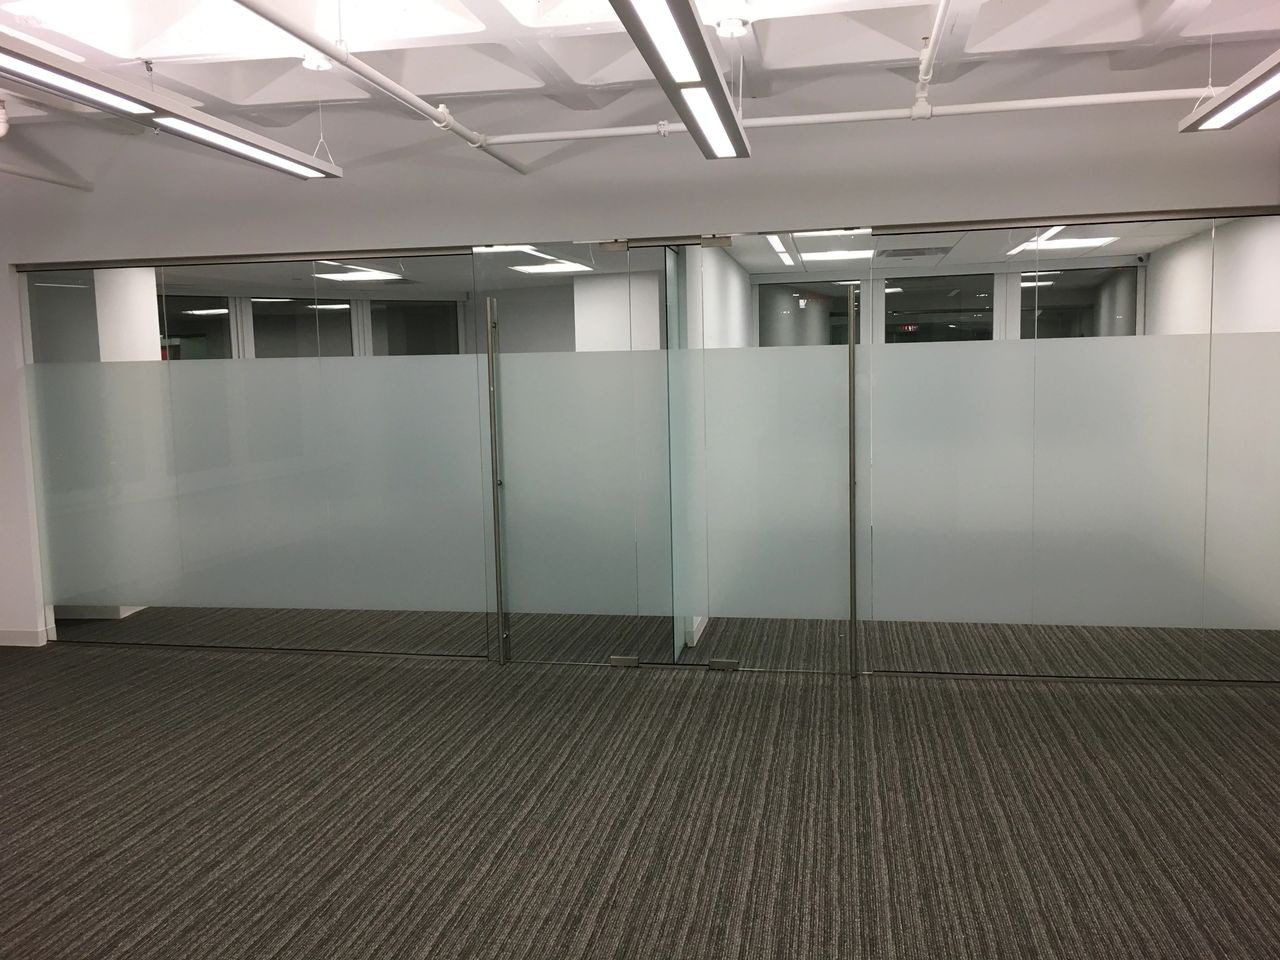 A room with glass walls and carpet flooring.